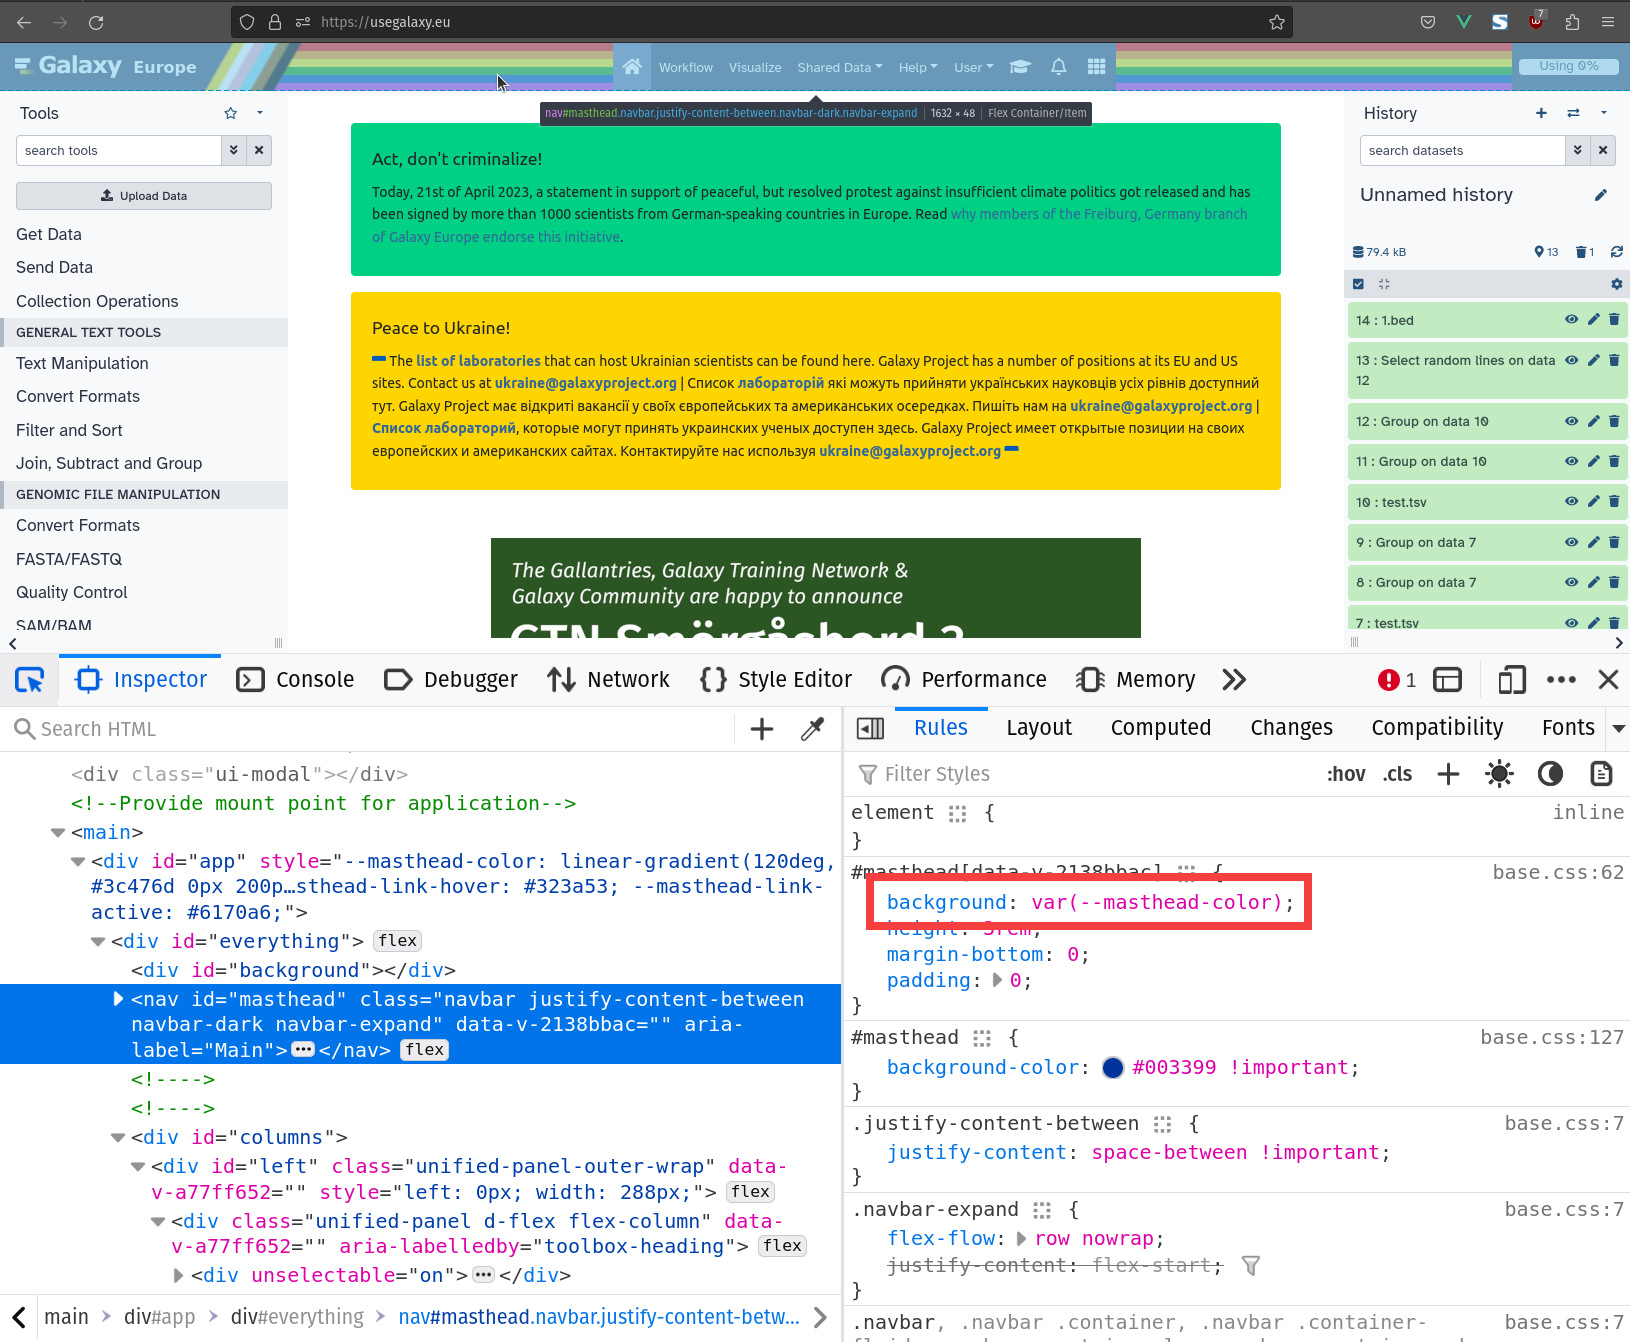 Screenshot of Firefox dev tools, with the CSS variable 